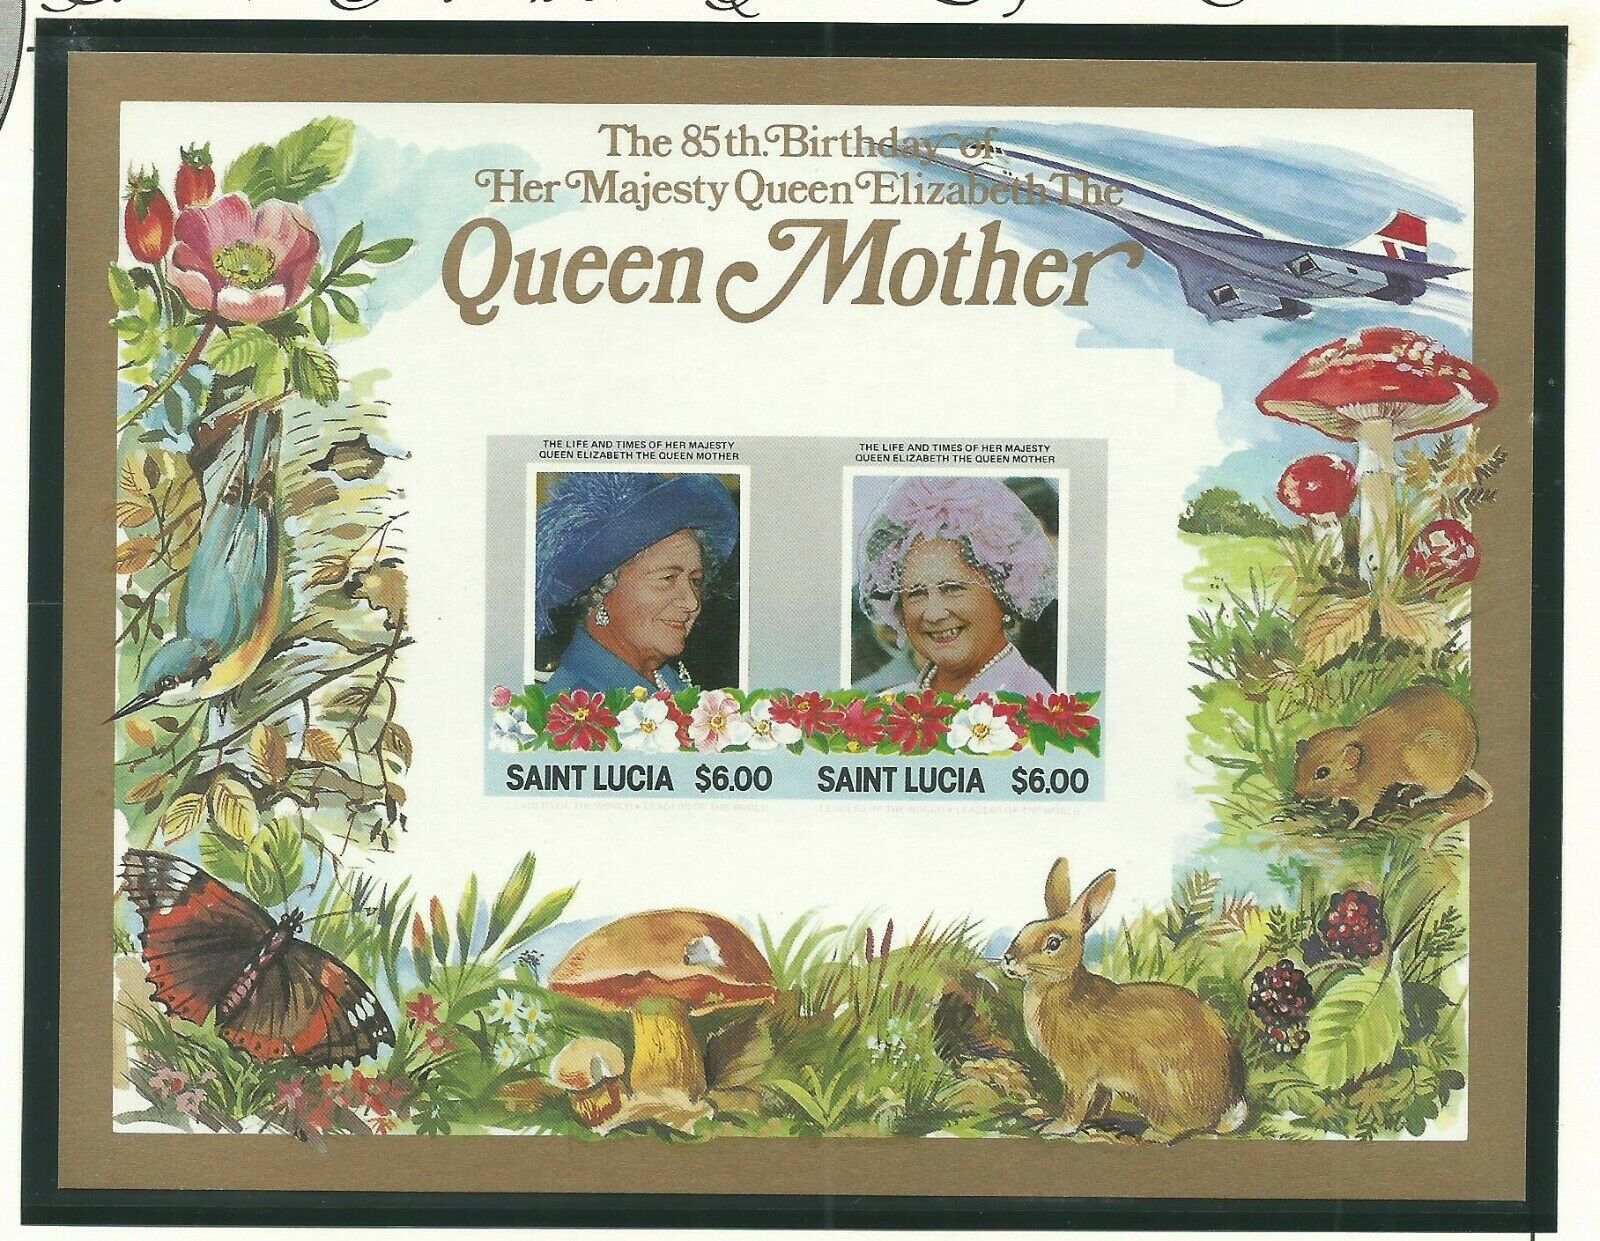 St. Lucia - Queen Mother 85th Birthday - Mint Nh Miniature Sheet